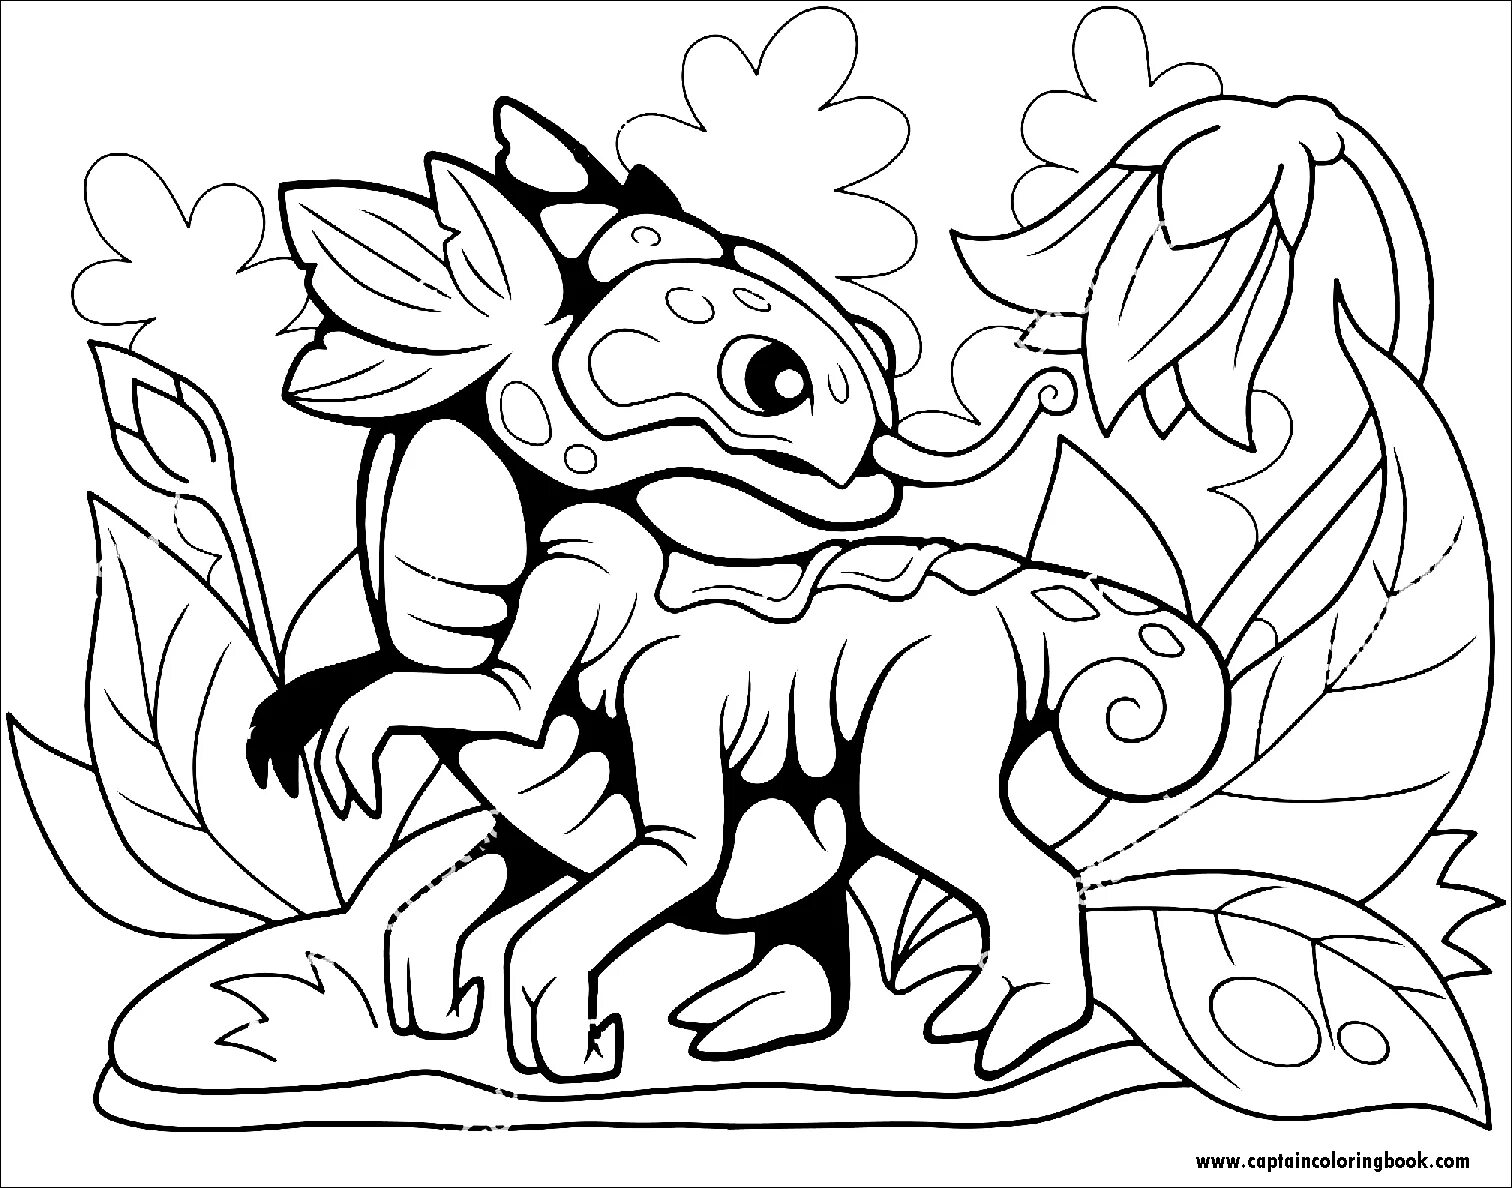 Cute and adorable dragon coloring book